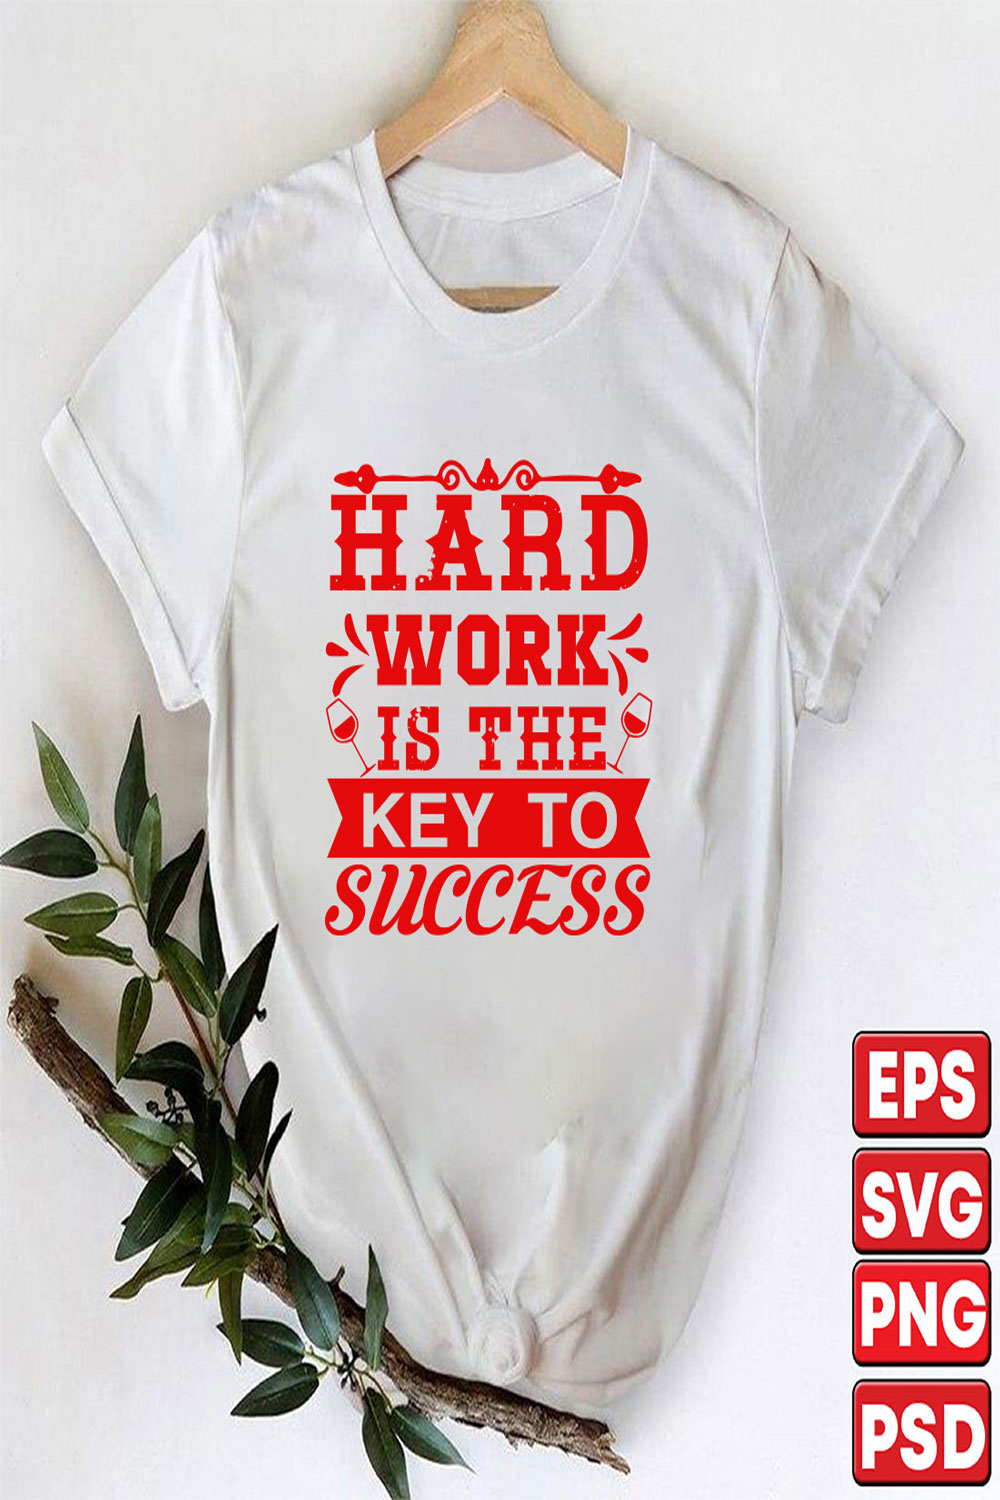 Hard work is the key to success pinterest preview image.